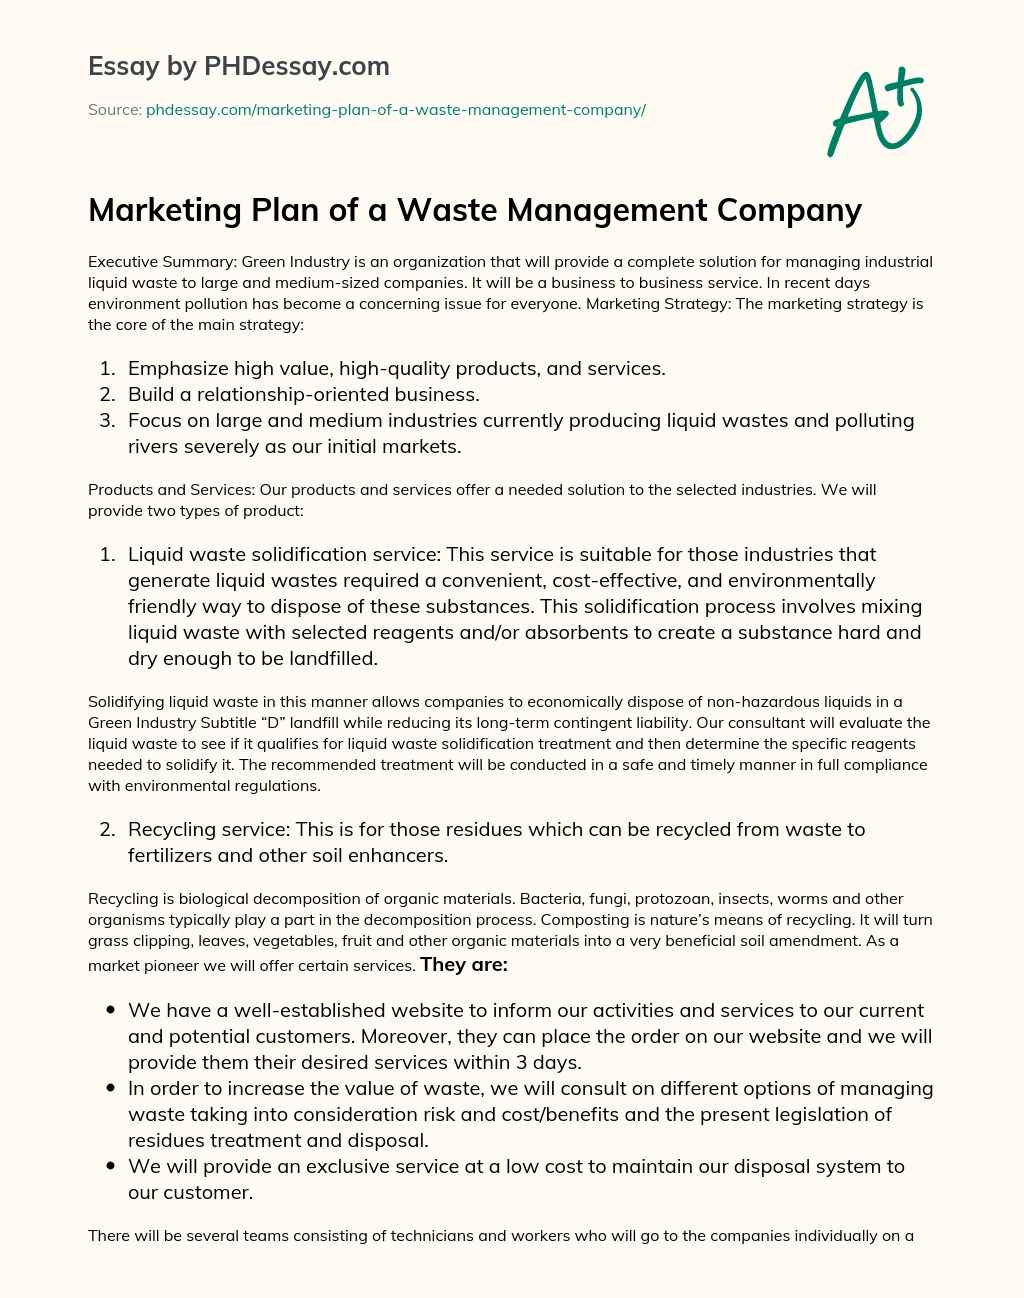 Marketing Plan of a Waste Management Company essay